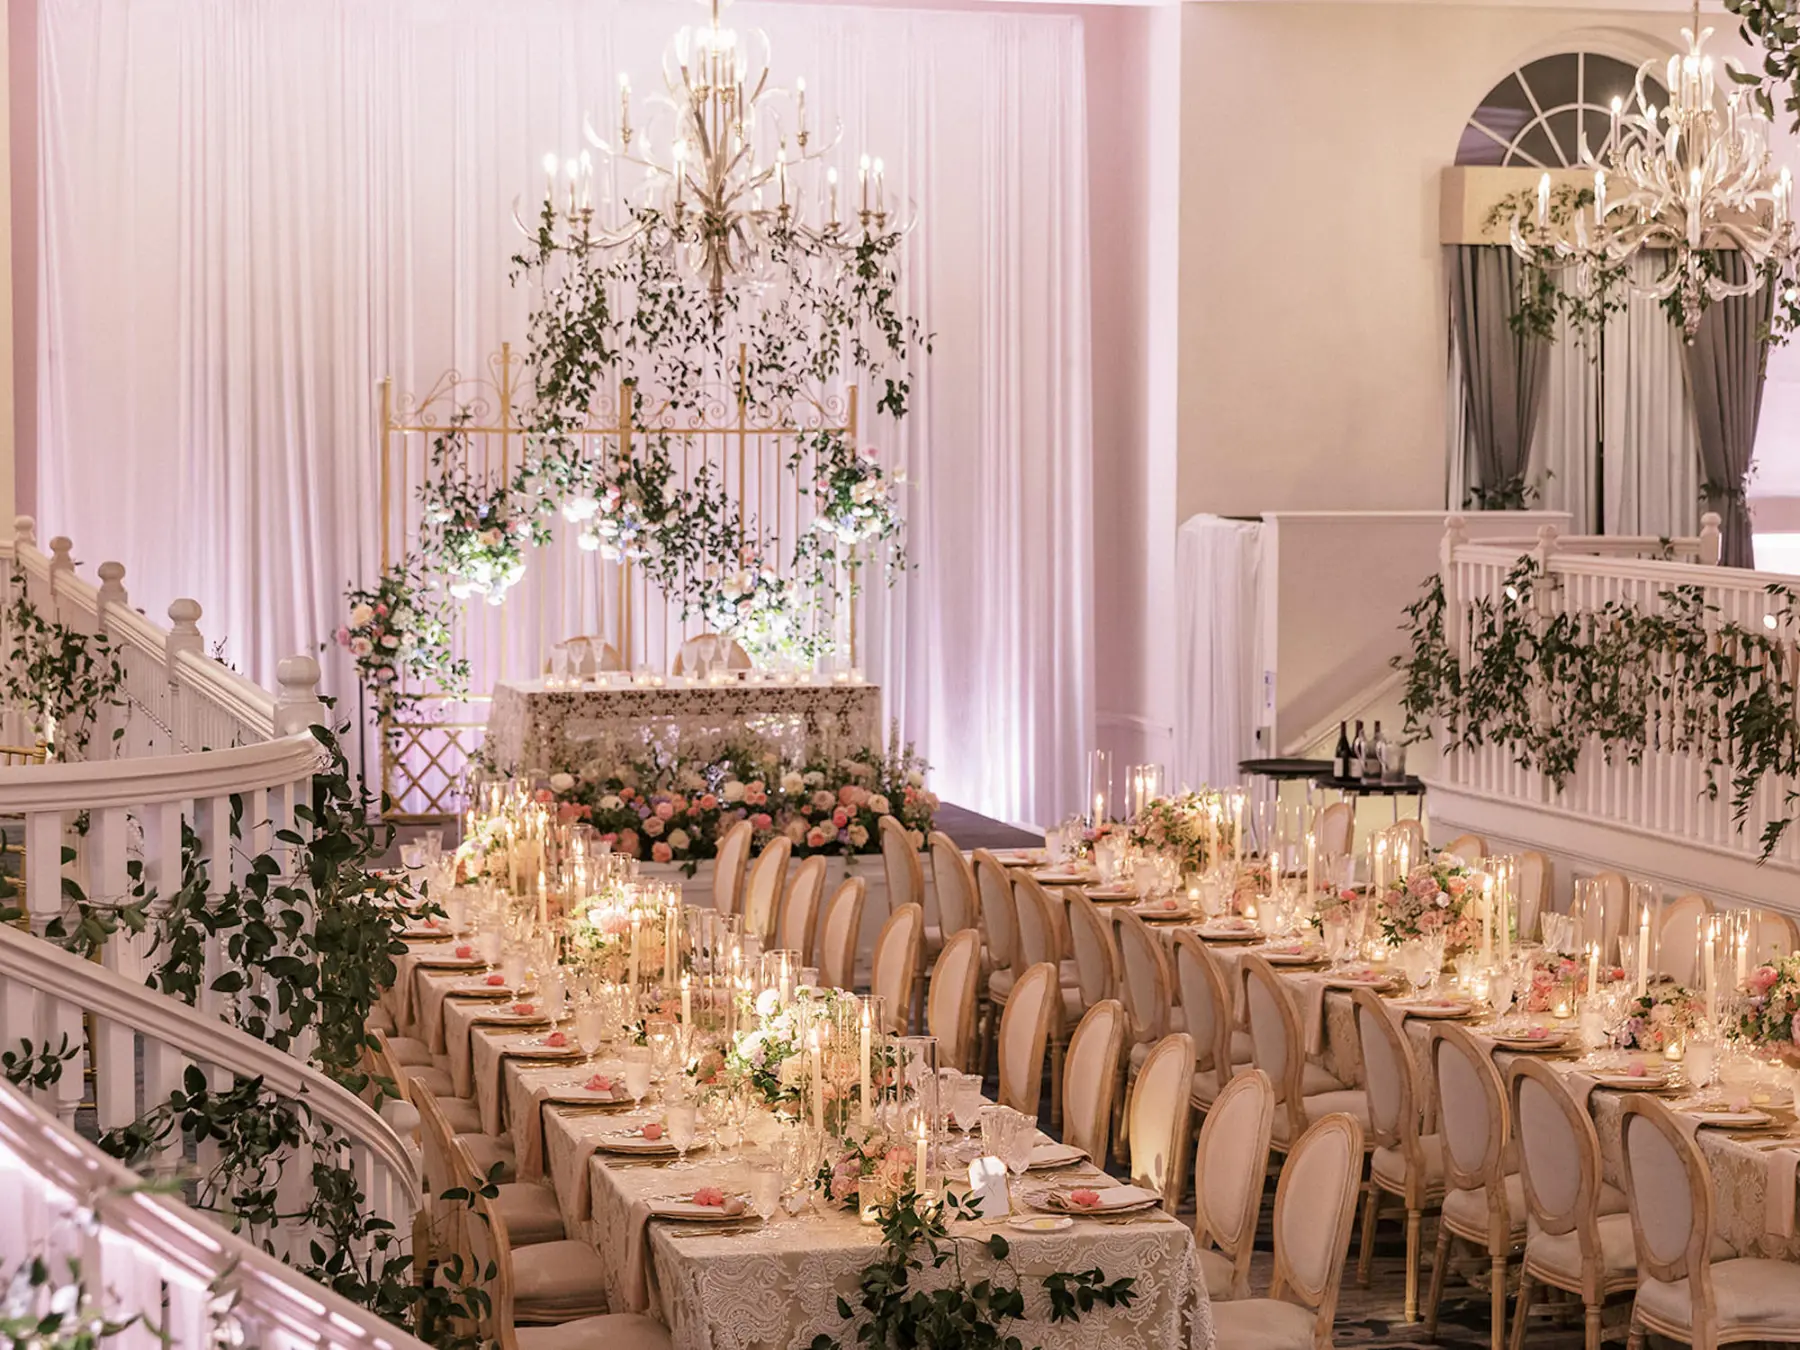 Whimsical Bridgerton Garden Ballroom Wedding Reception Inspiration | Long Feasting Tables | Greenery Garland Decor Ideas | Tampa Bay Event Venue Don CeSar | St Pete Planner Unique Weddings and Events | A Chair Affair | Kate Ryan Event Rentals